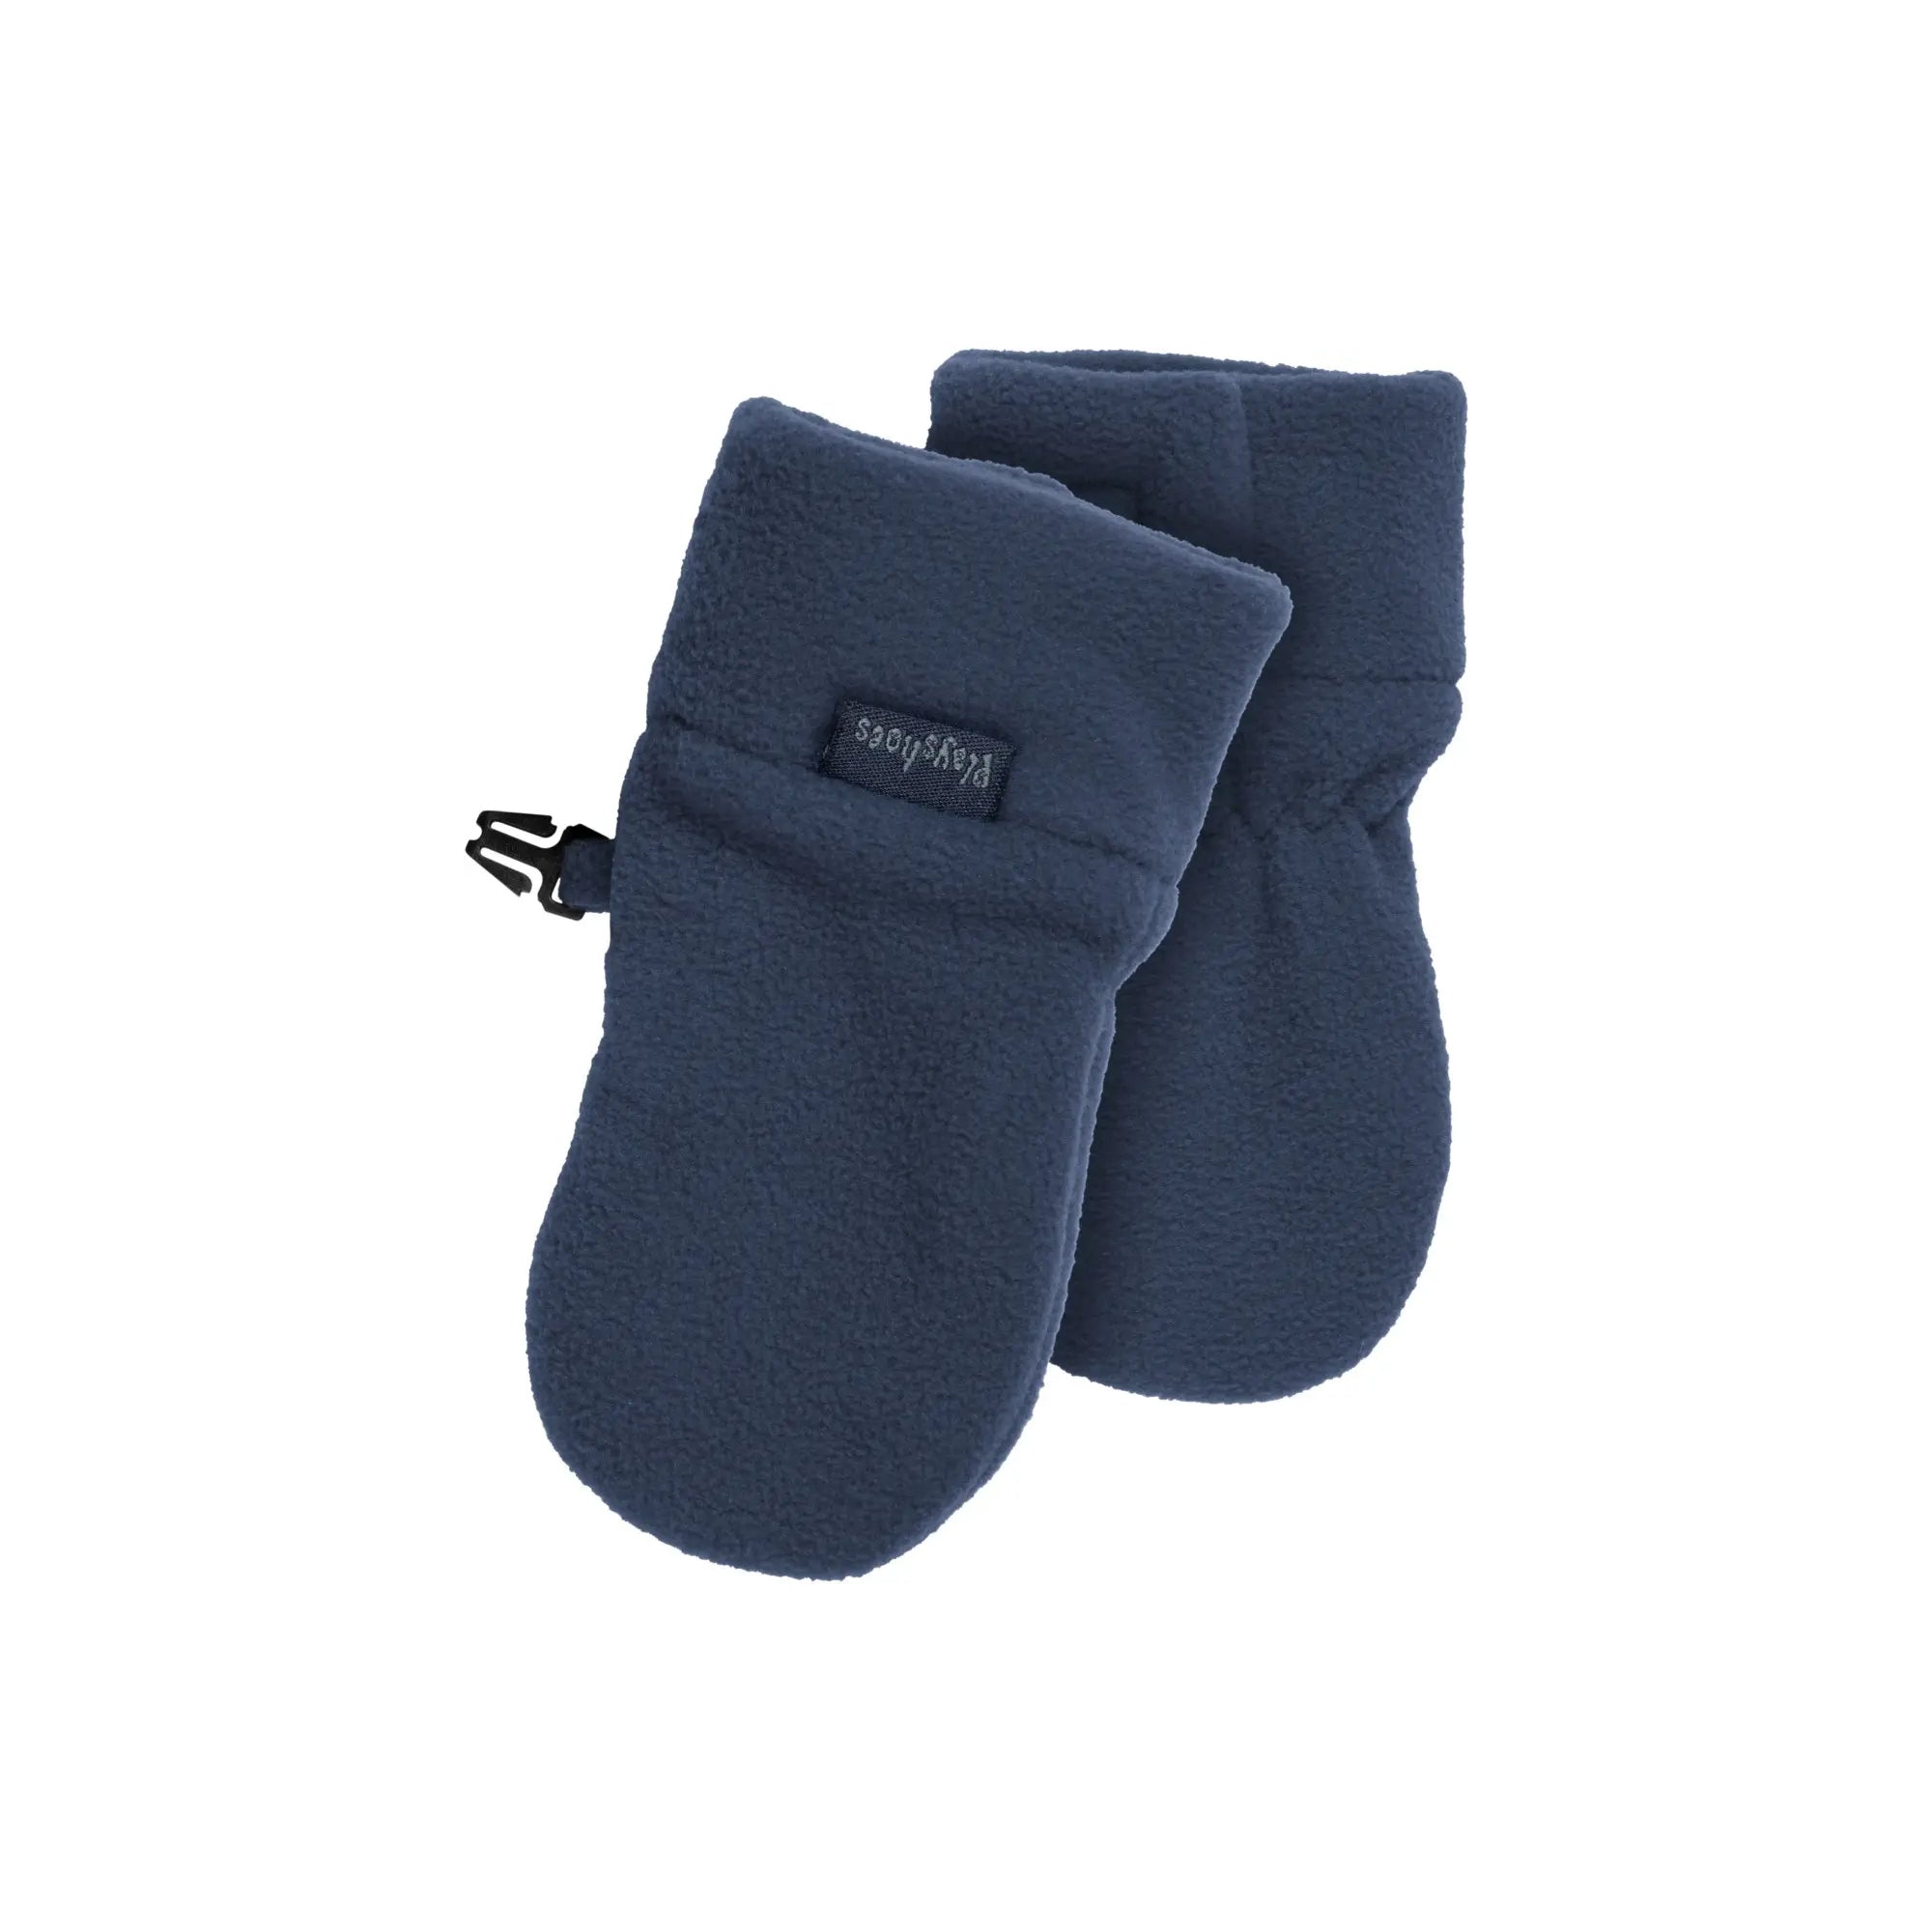 Play Shoes GmbH_Fleece Mittens Marine_Accessories